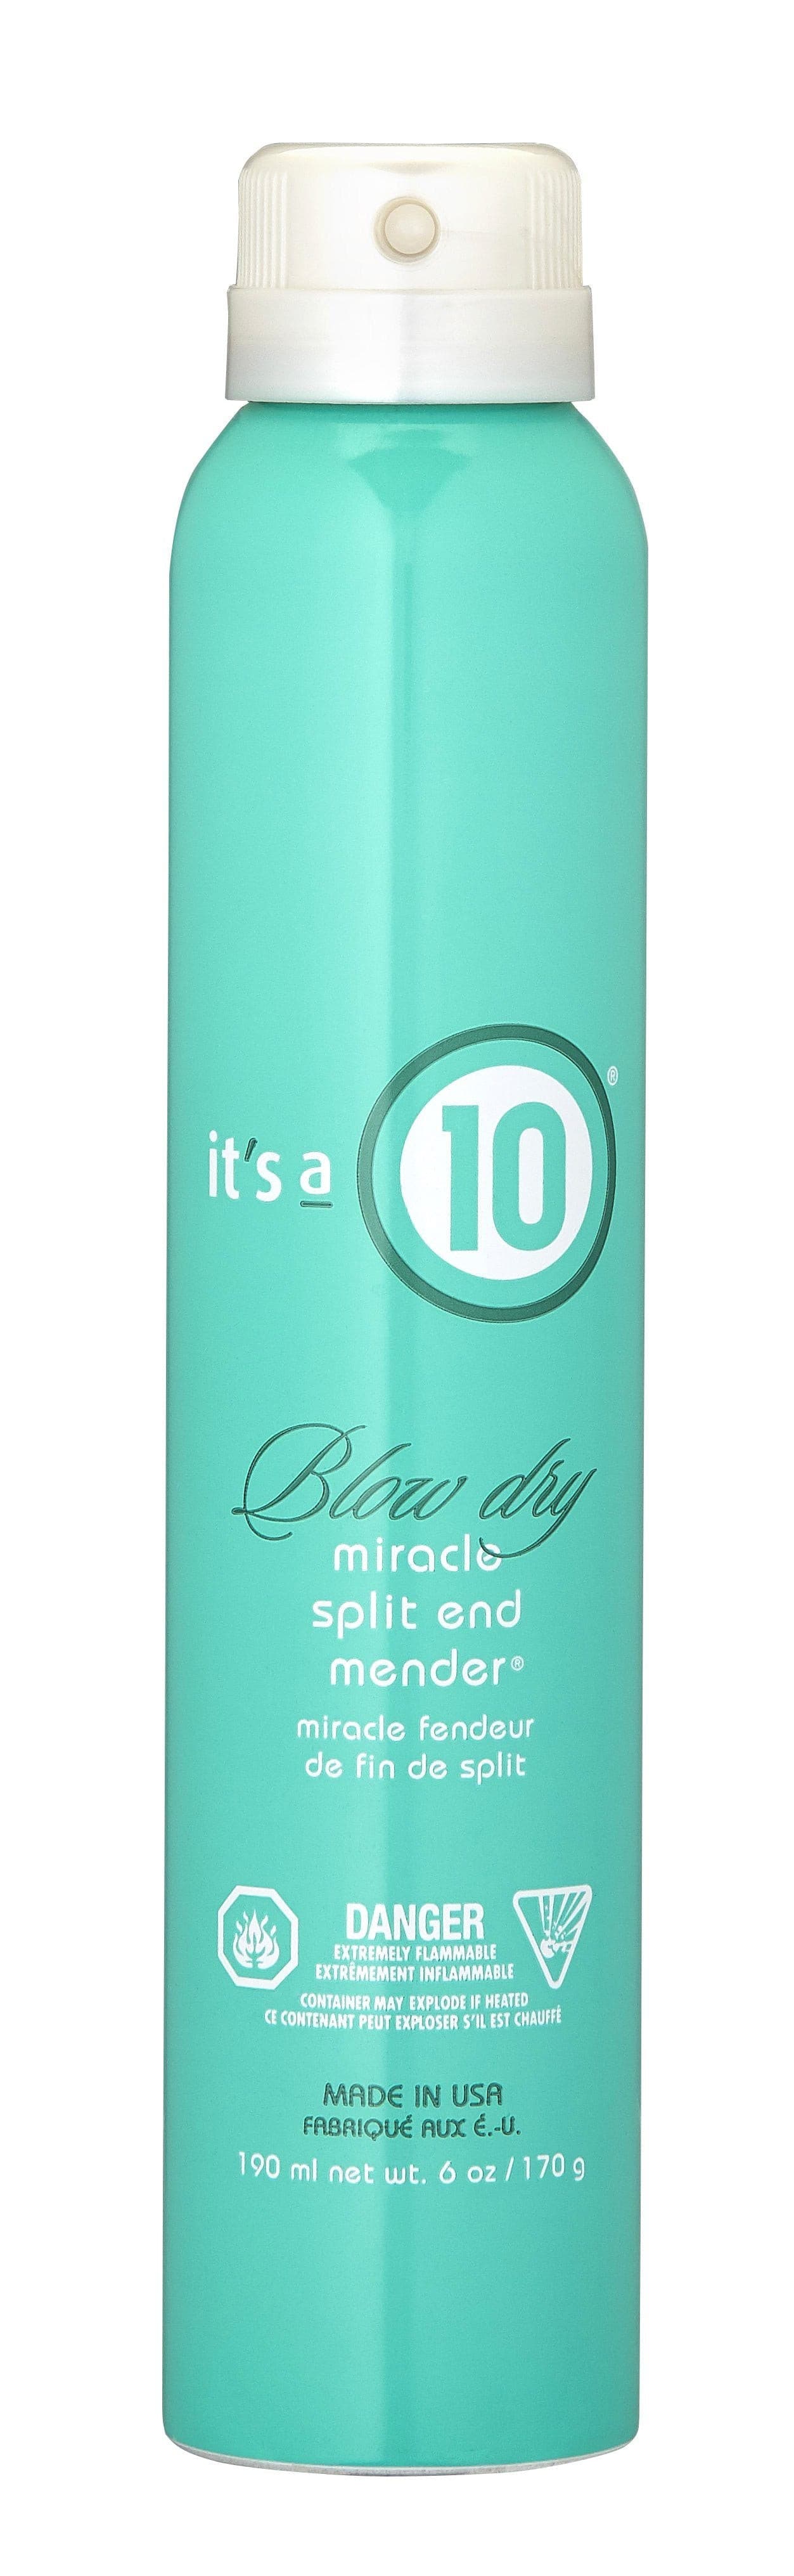 It’s A 10 Blow Dry Miracle Split End Mender